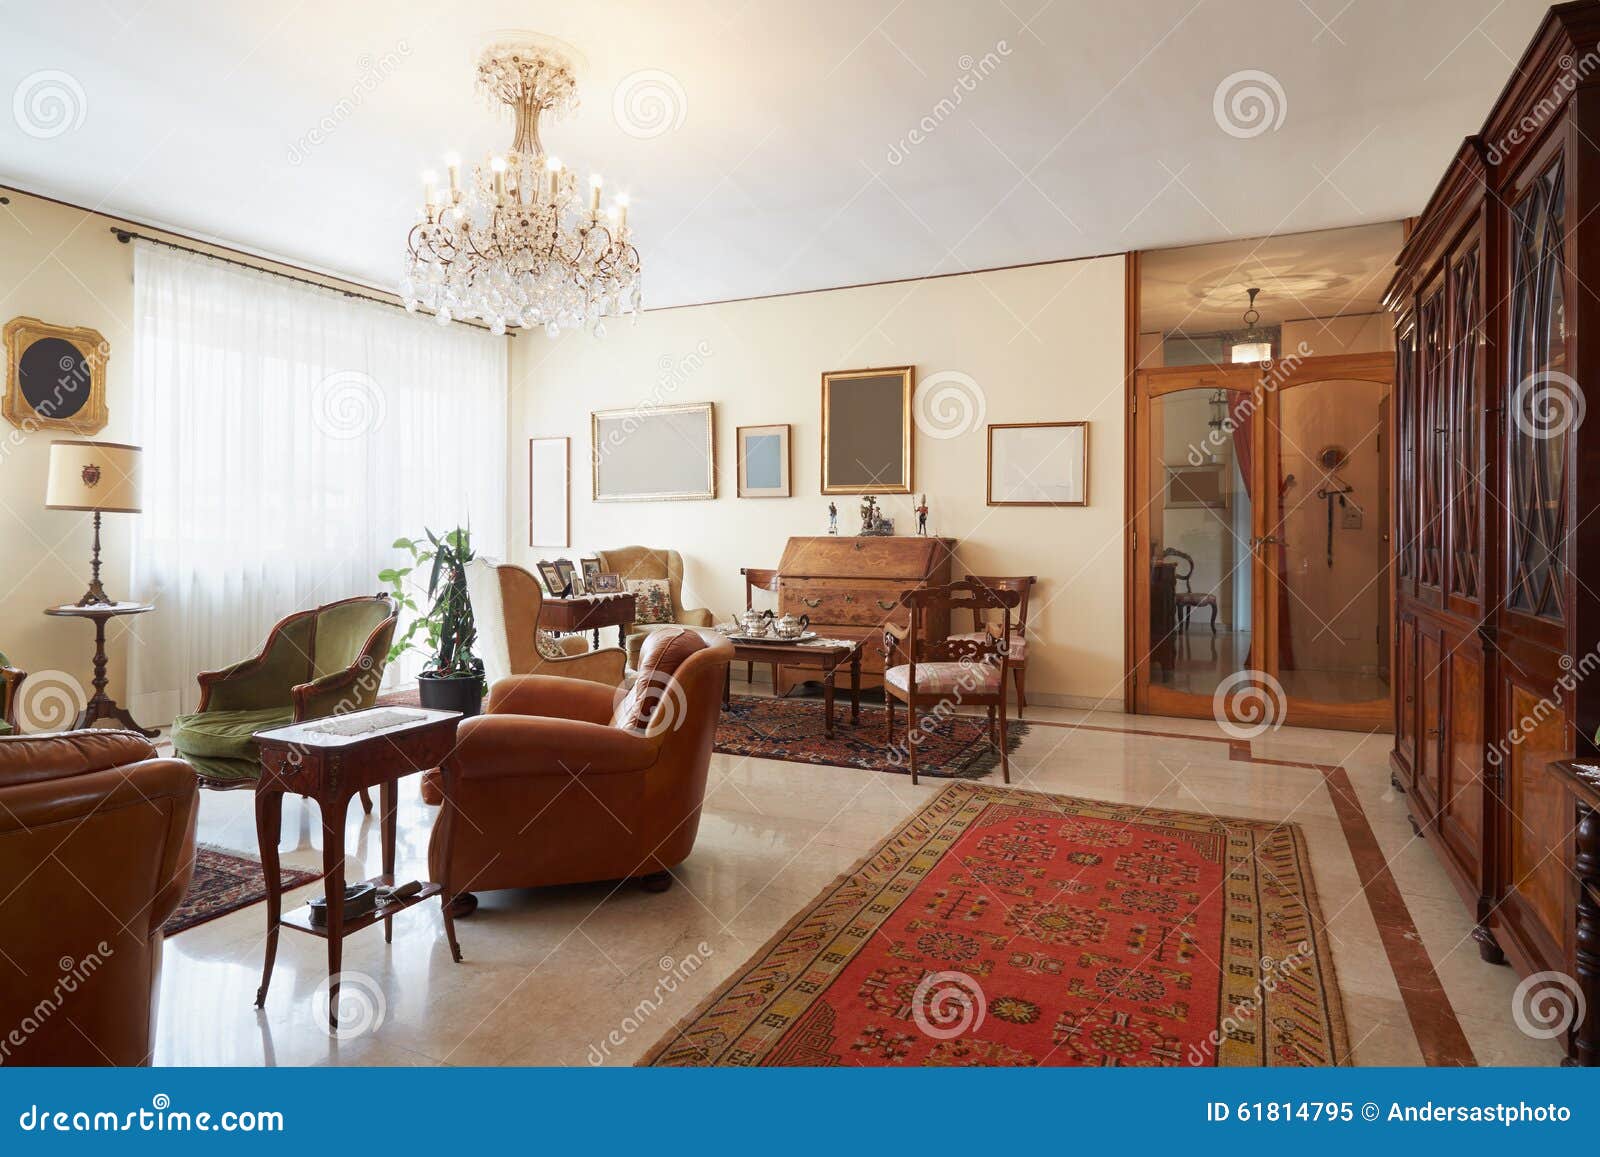 living room, classic interior with antiquities